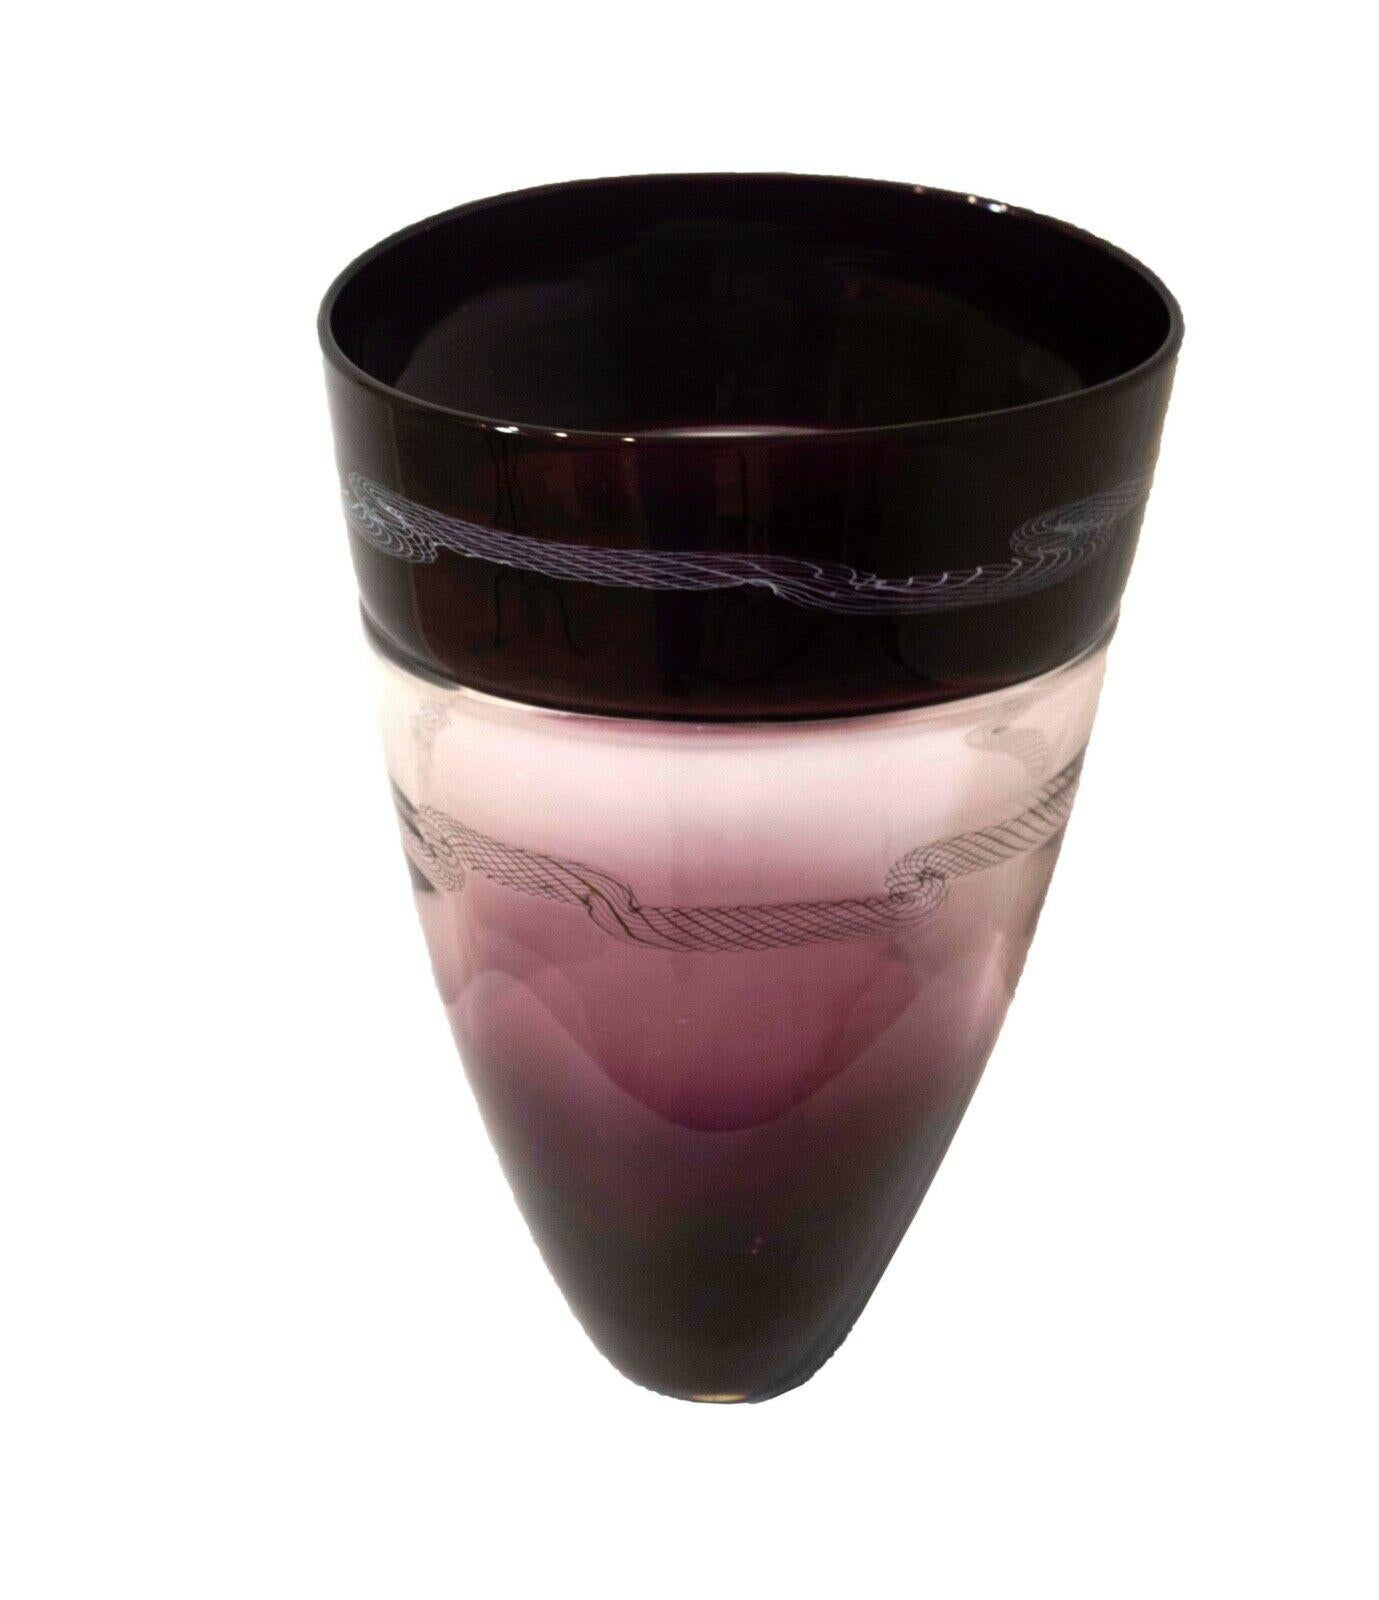 A gorgeous example of Murano glass titled Cabaret. This Seguso vase in hombre purples includes a two rare designs in white and black blown in the glass. Signed and dated 1999

Measures: 9.25